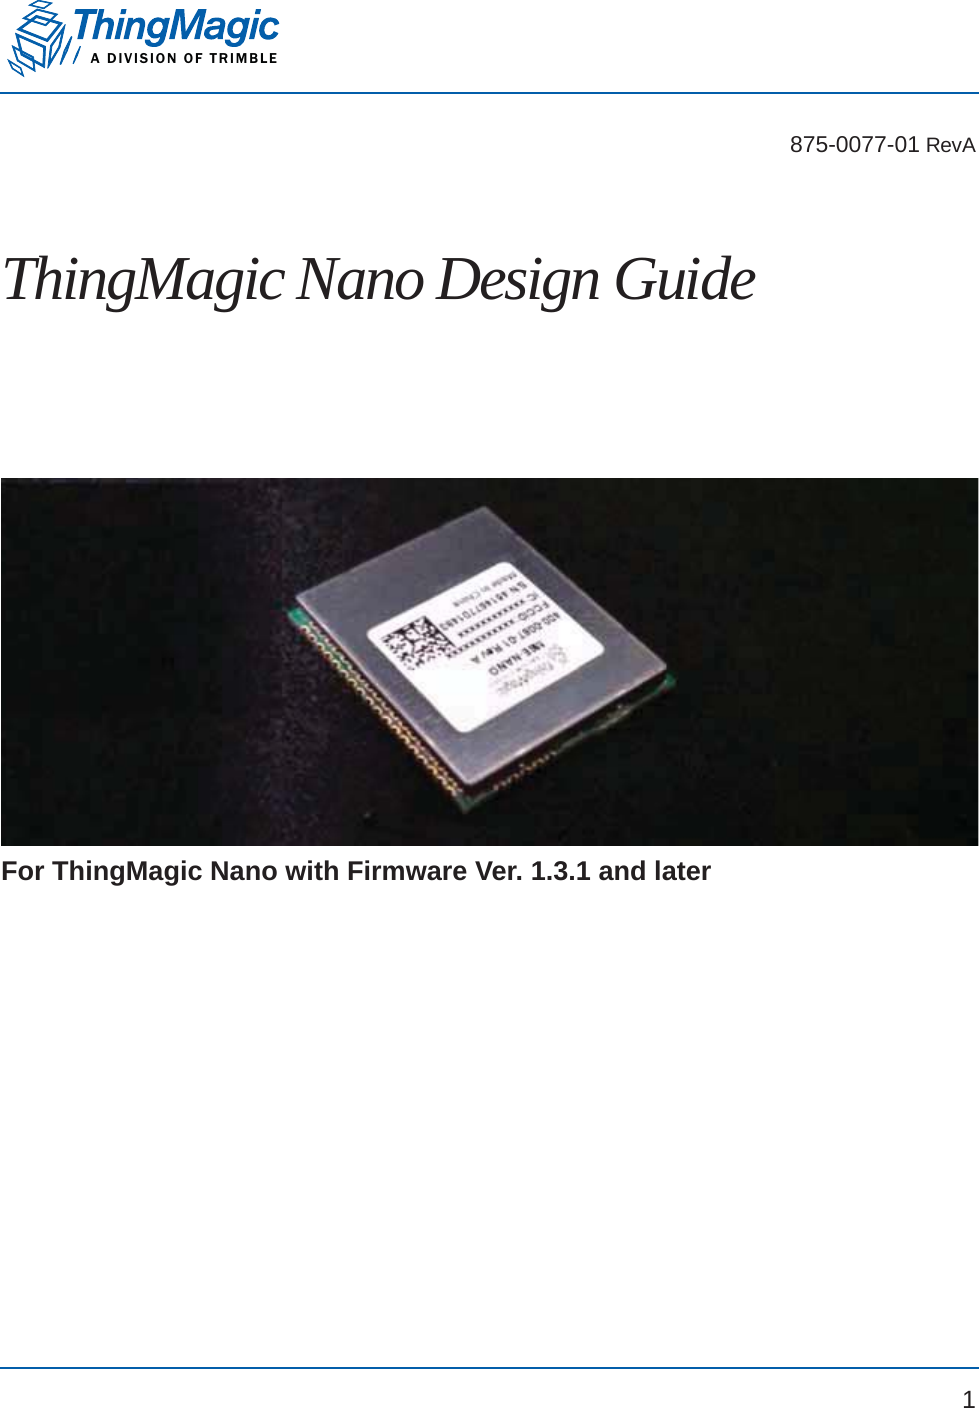 A DIVISION OF TRIMBLE1875-0077-01 RevAThingMagic Nano Design Guide For ThingMagic Nano with Firmware Ver. 1.3.1 and later